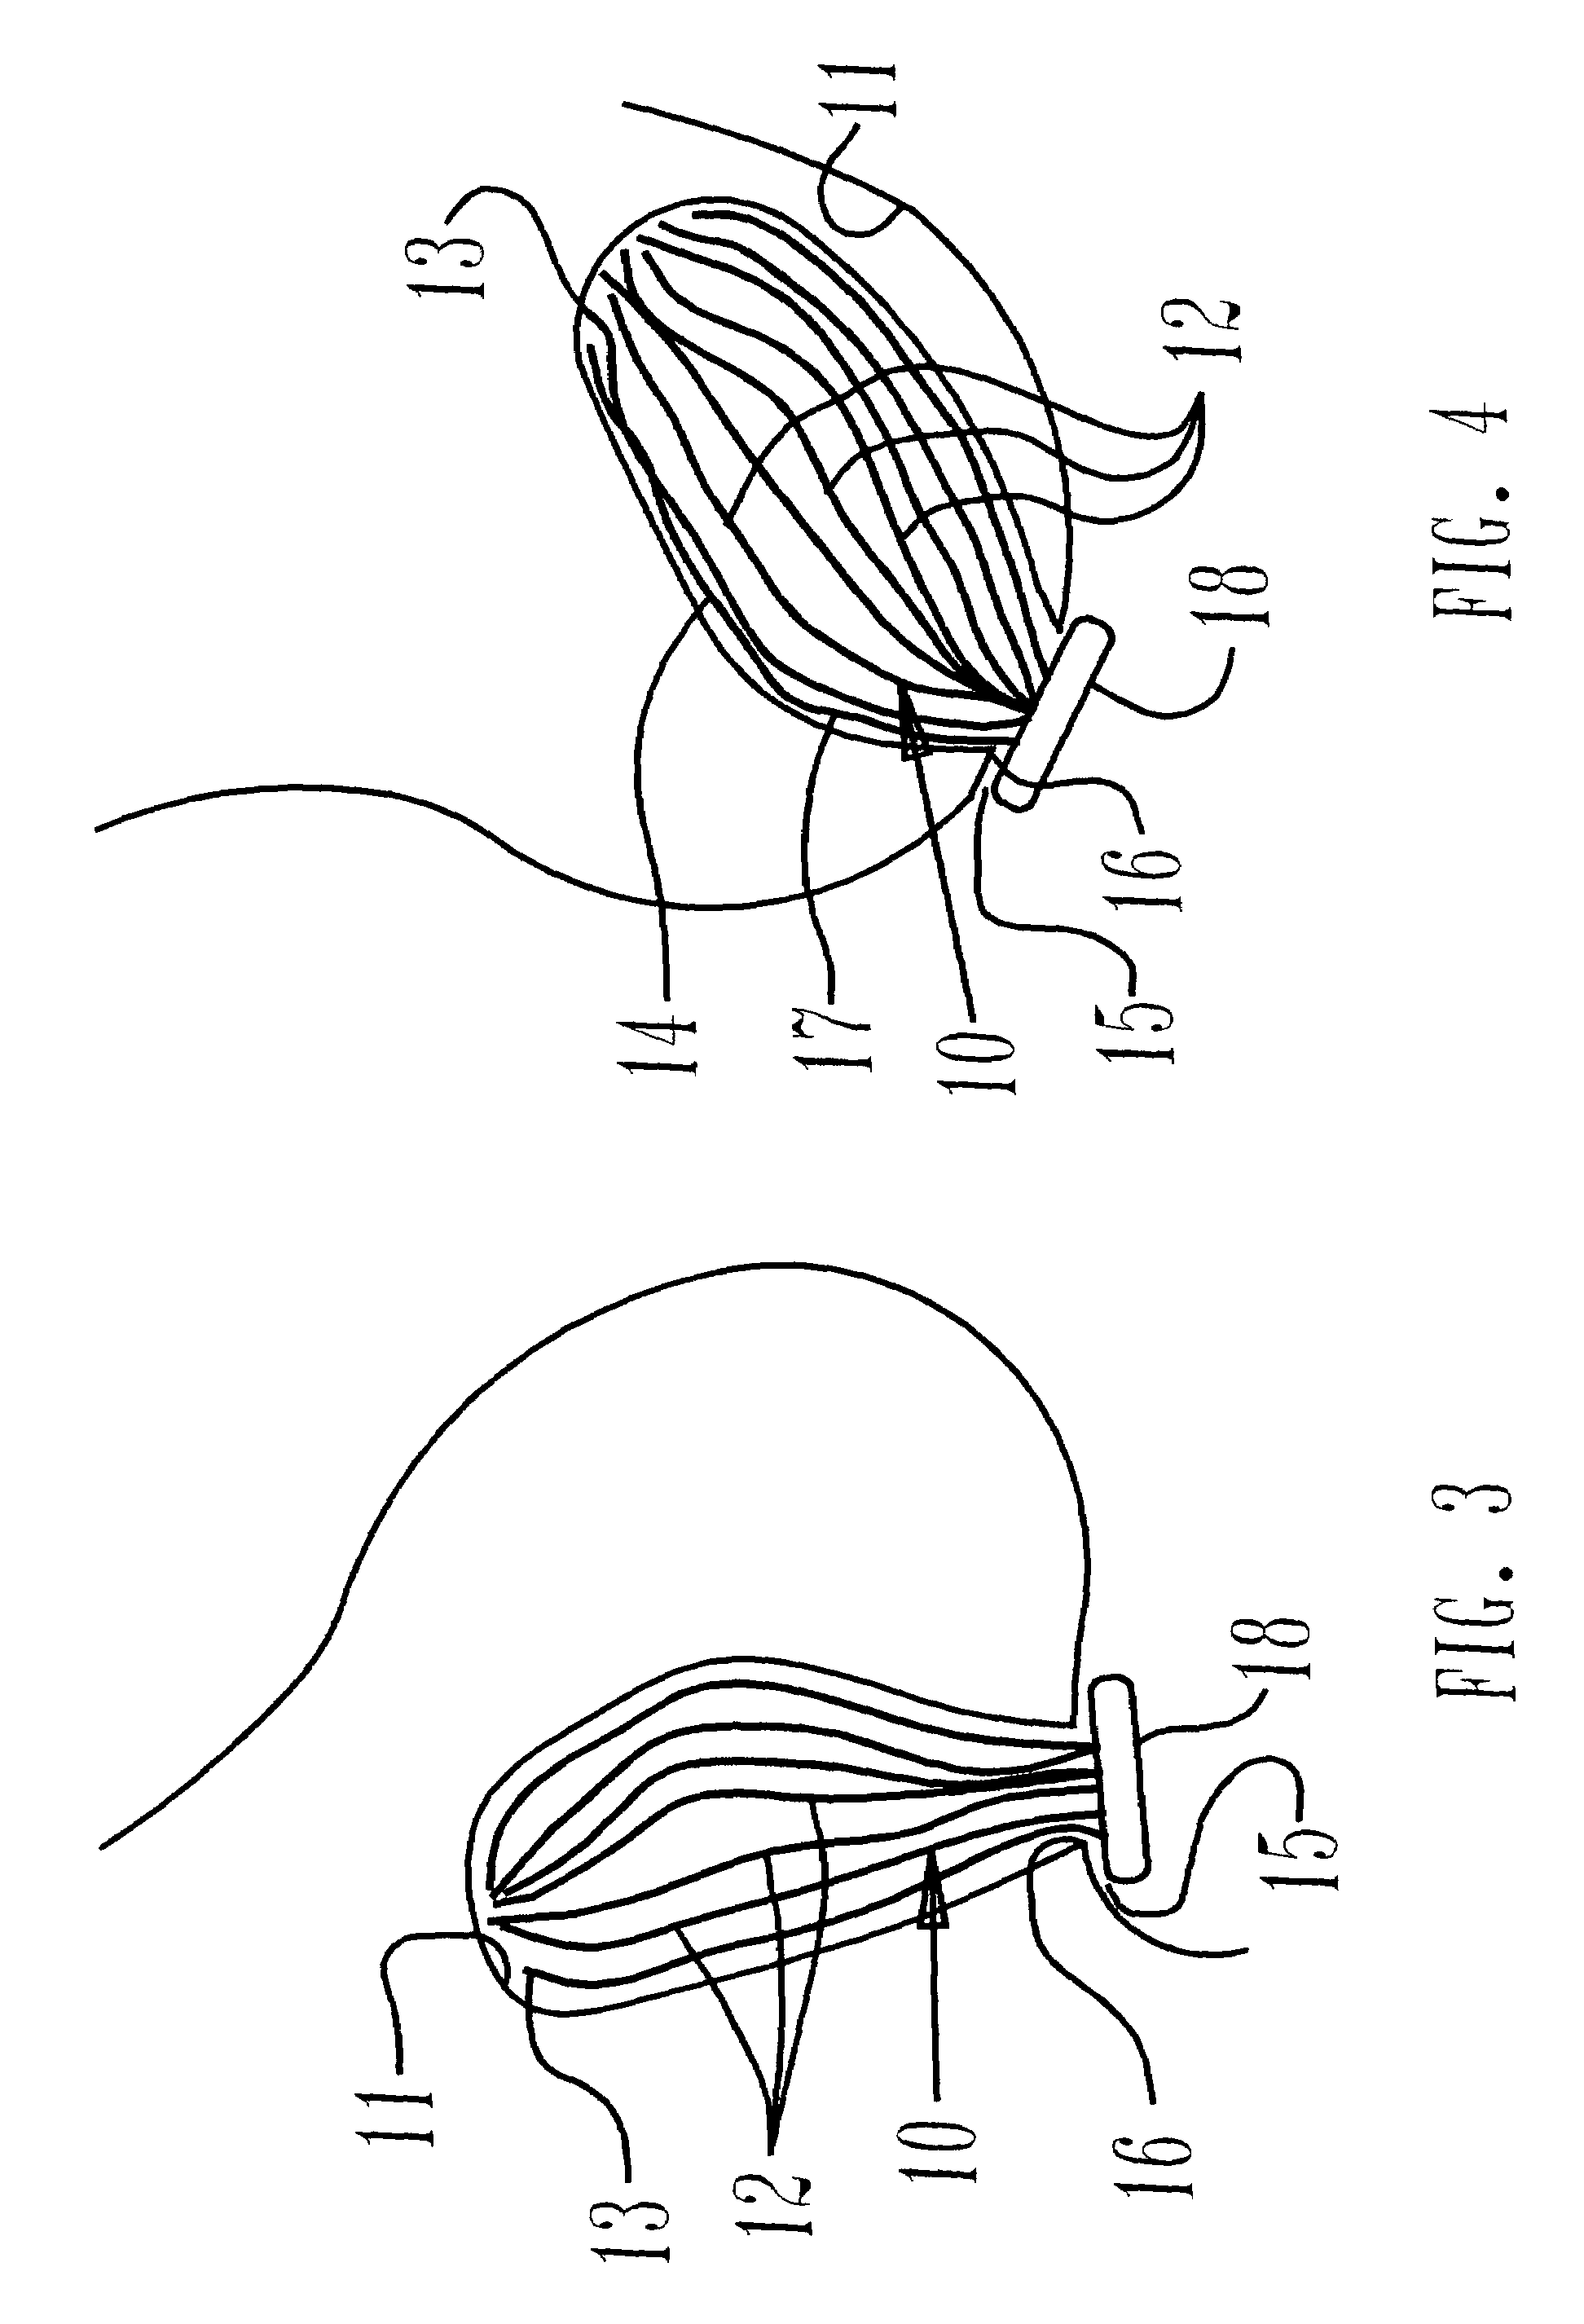 Apparatus and method for drainage